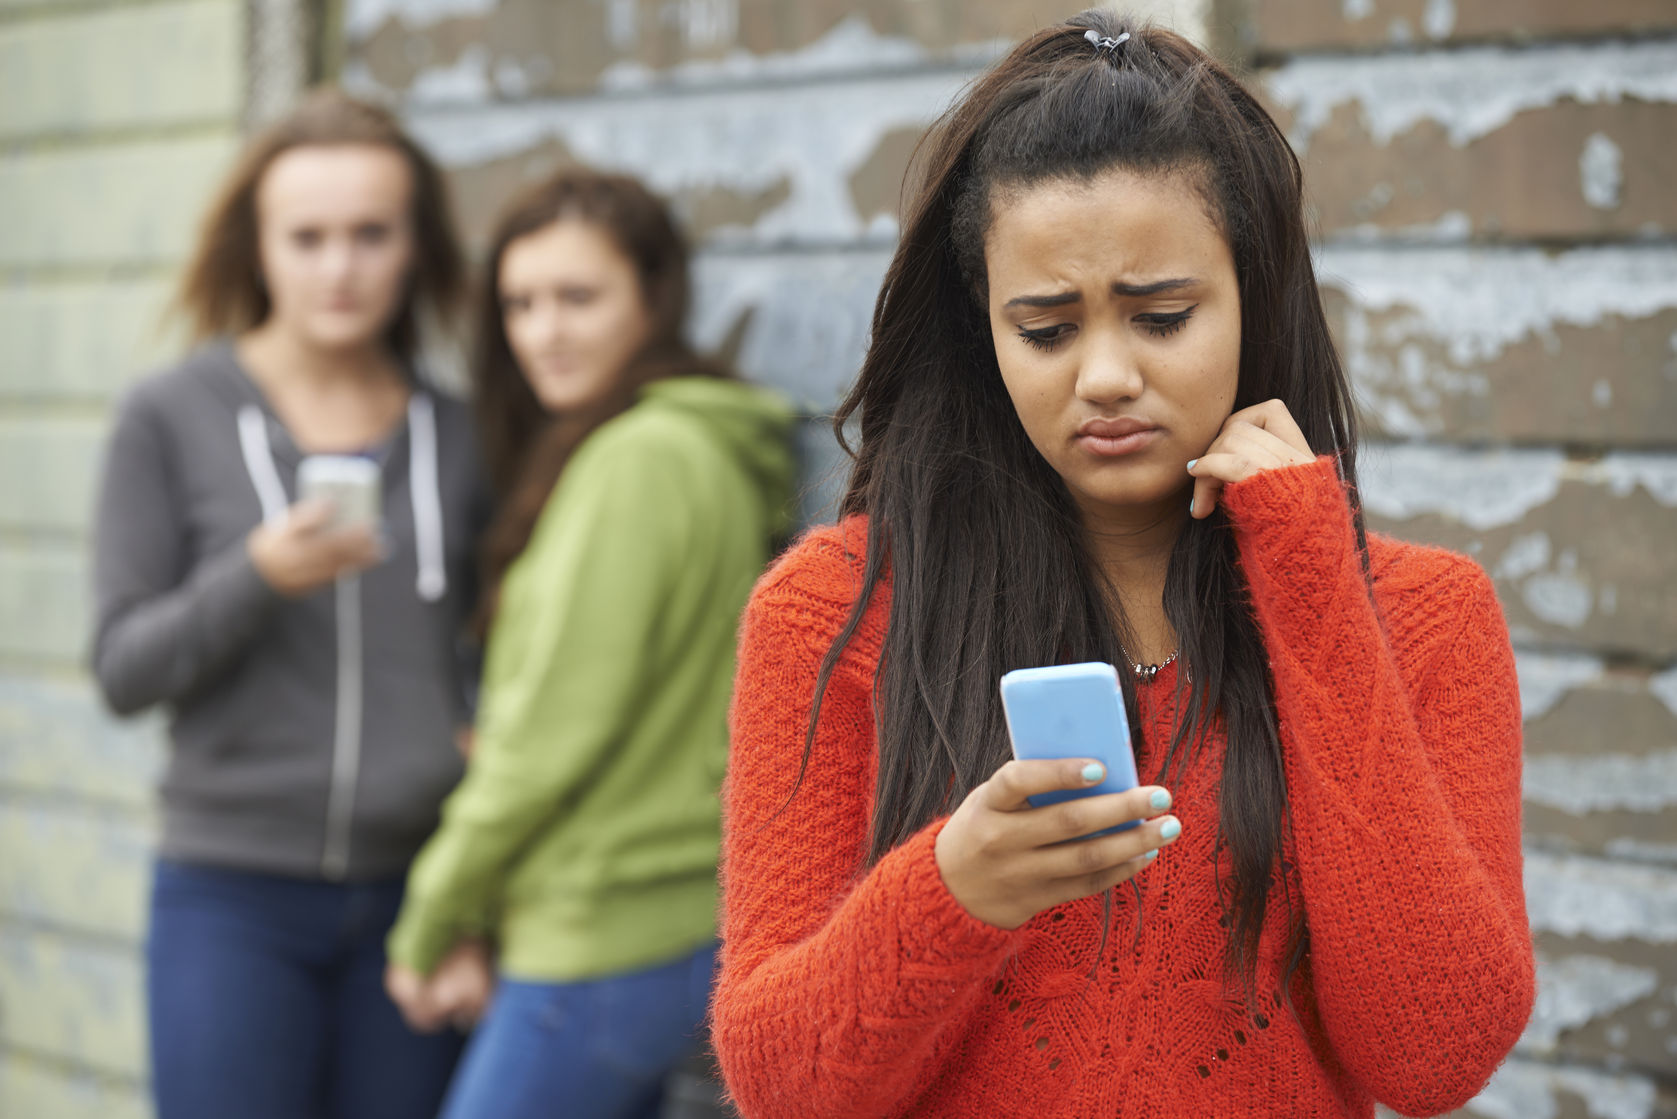 eenage girl being bullied by text message